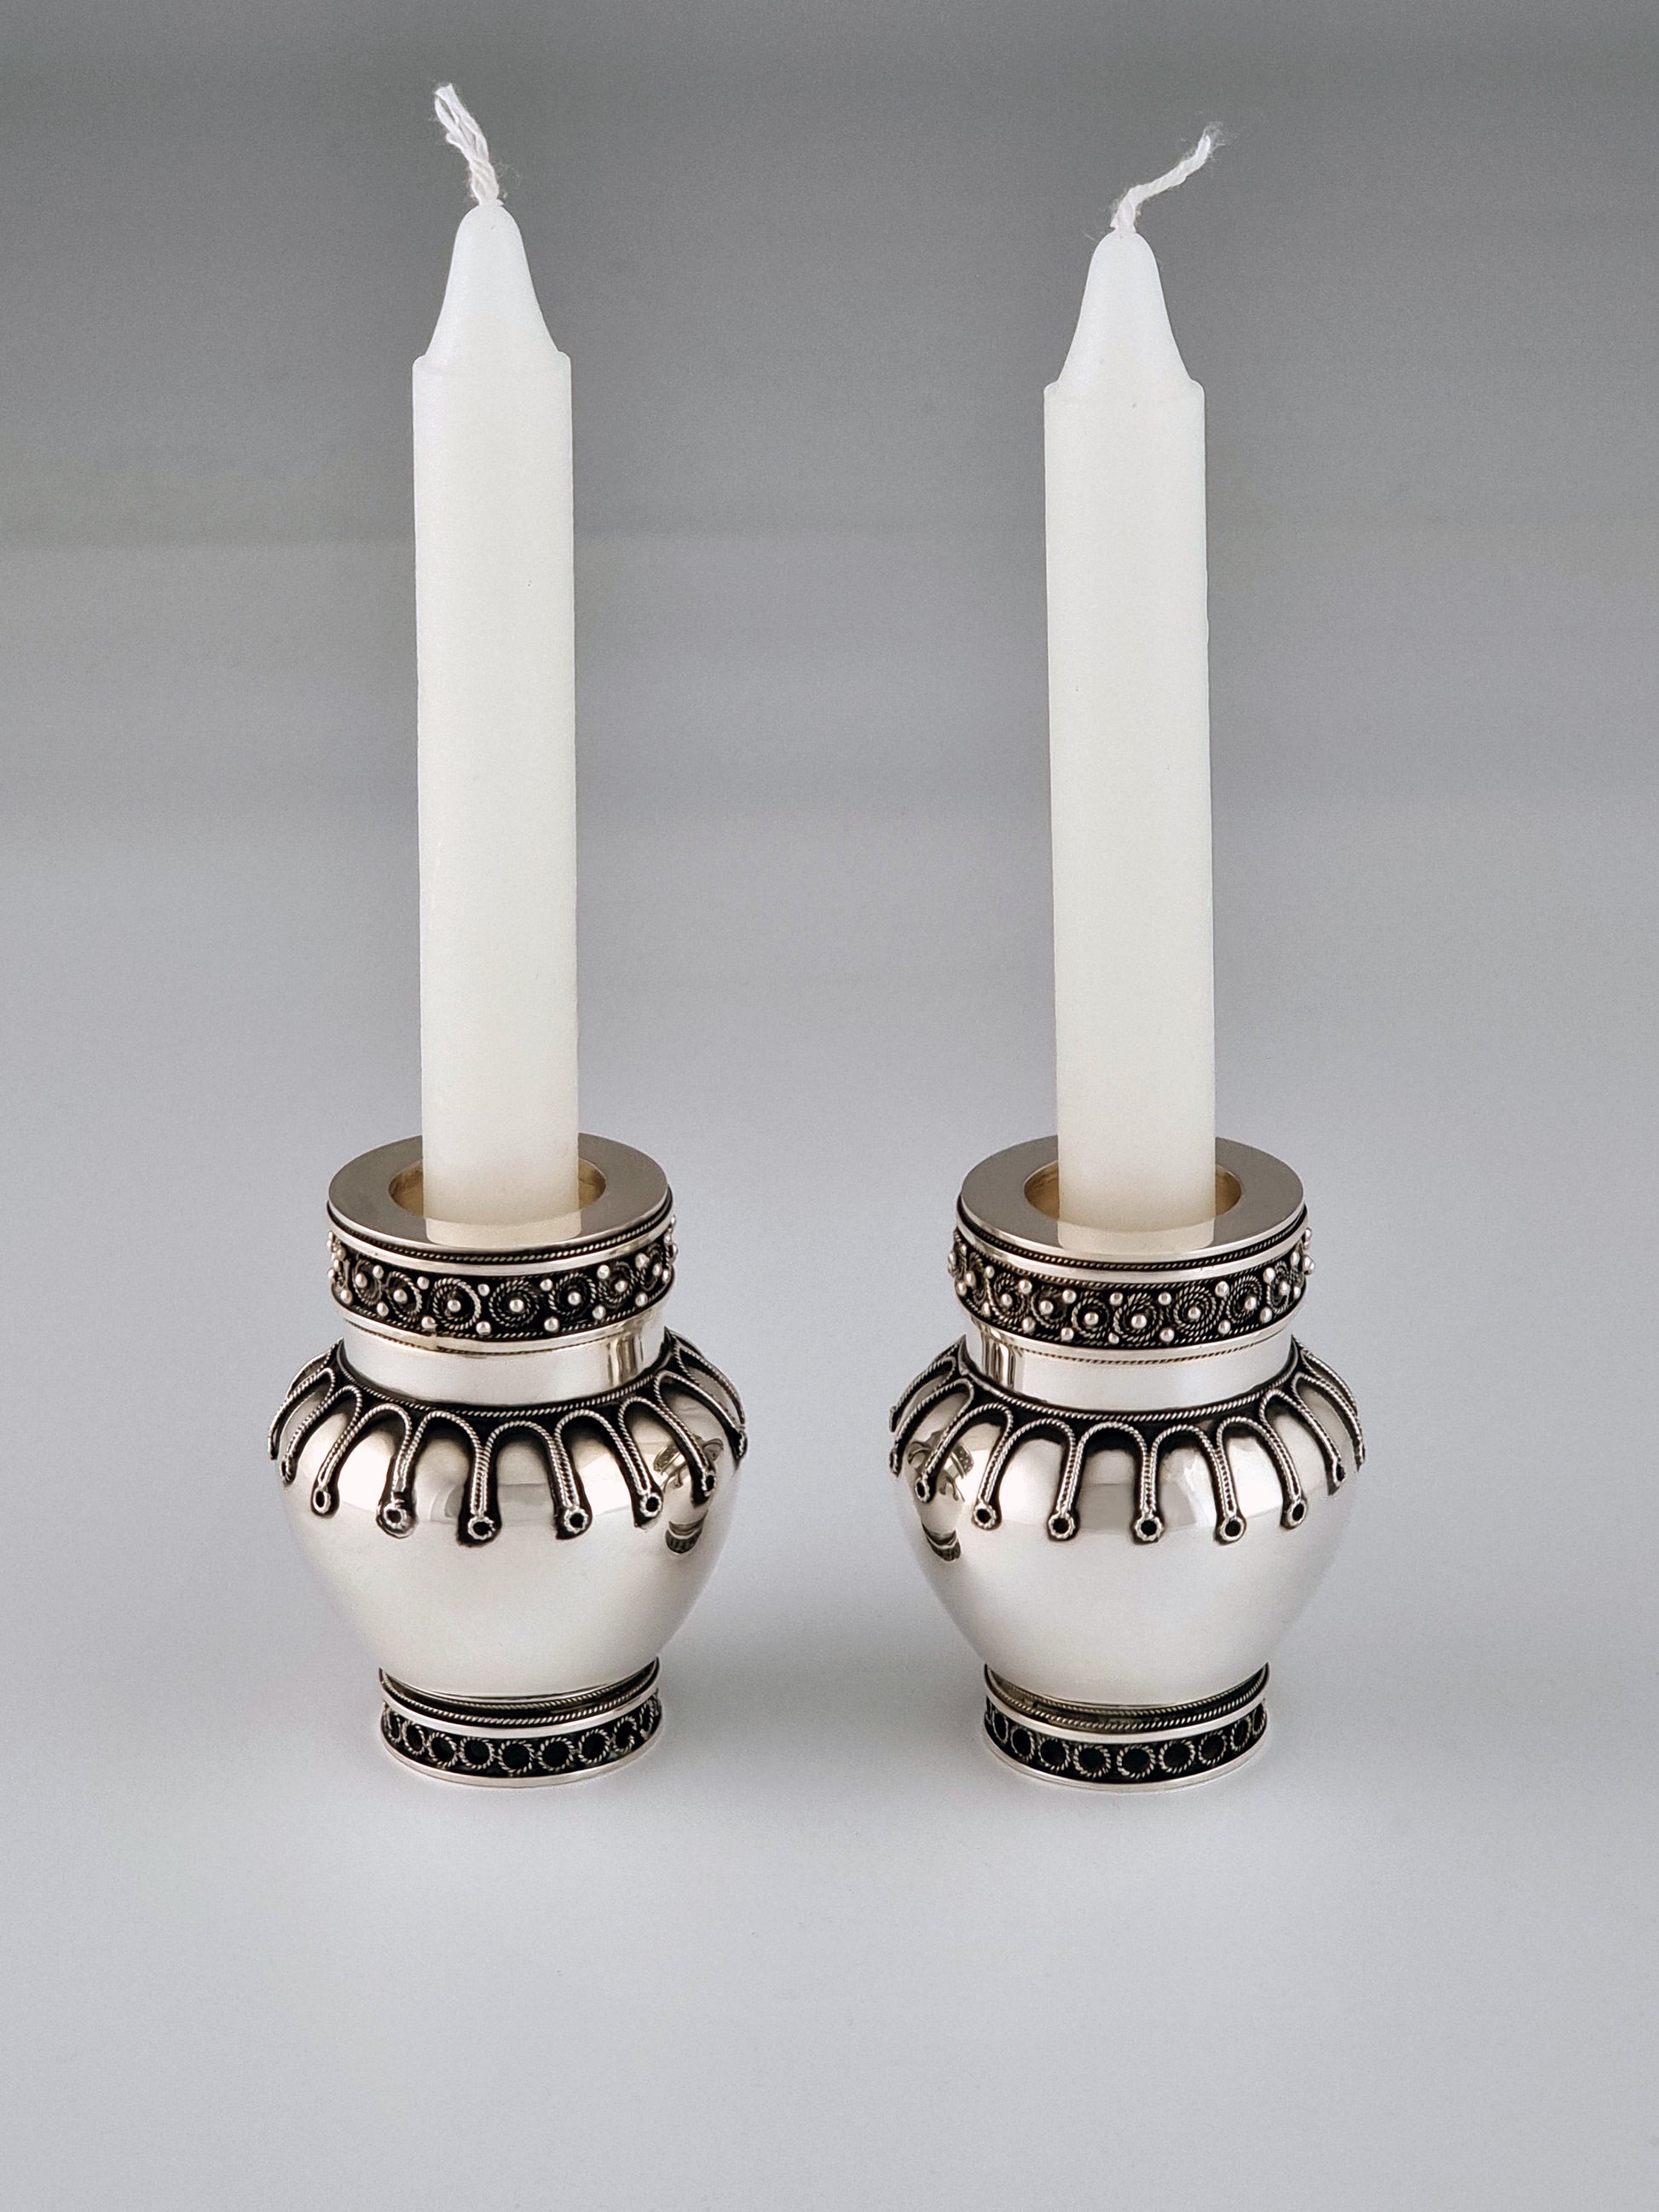 Elijah Candlesticks. These candlesticks were designed by Margie in 2003, they measure 2½” in height and are made from sterling silver.